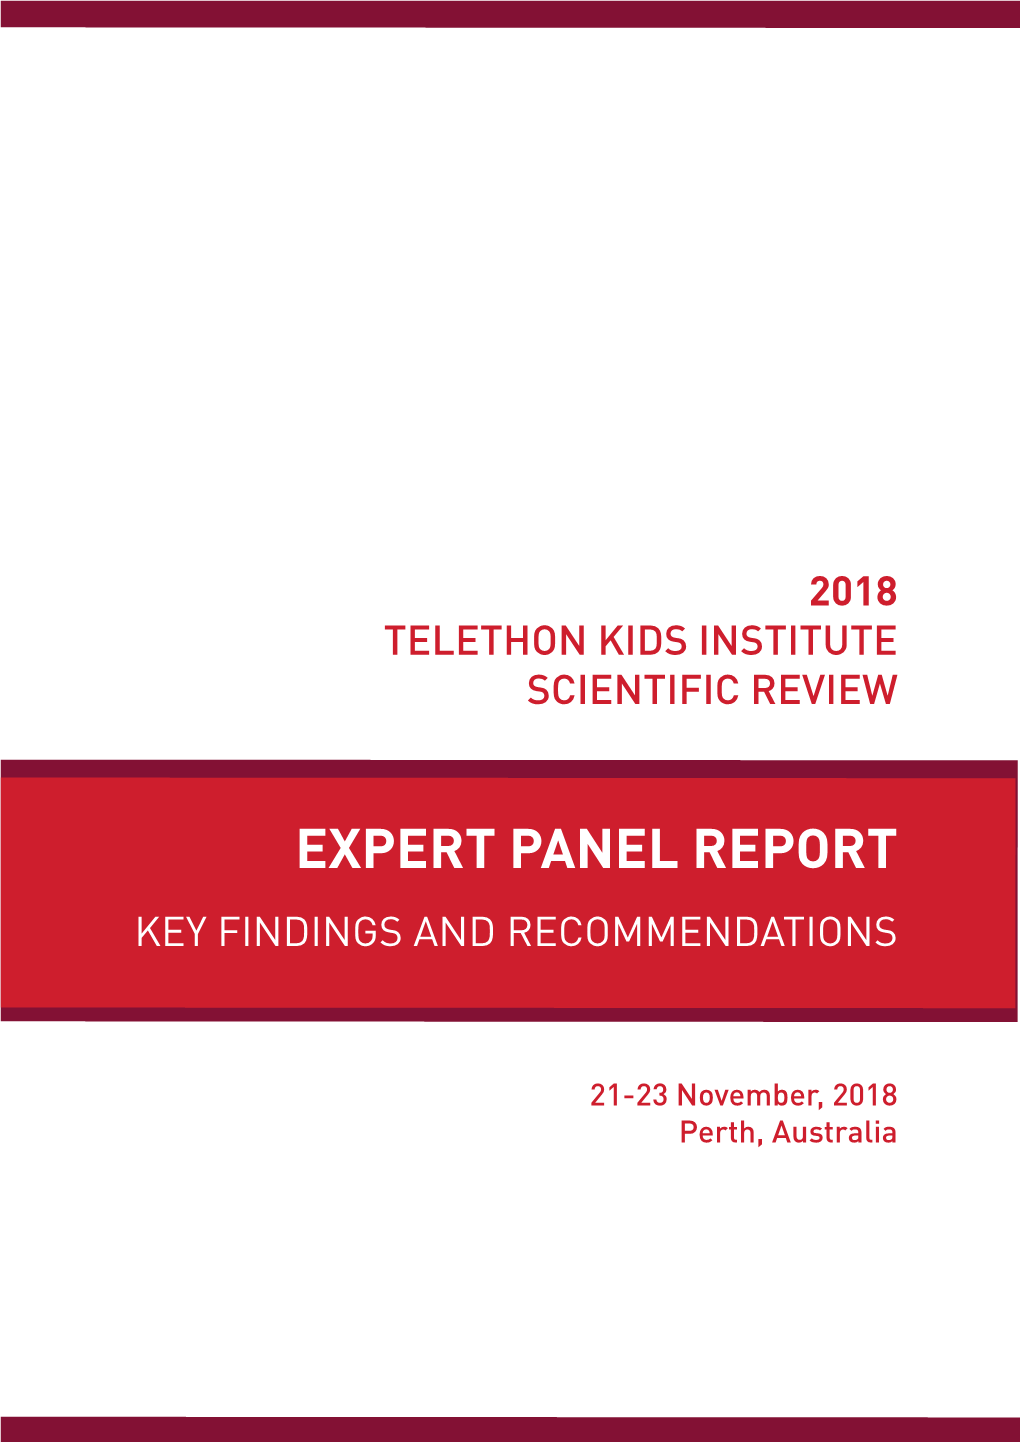 Expert Panel Report Key Findings and Recommendations